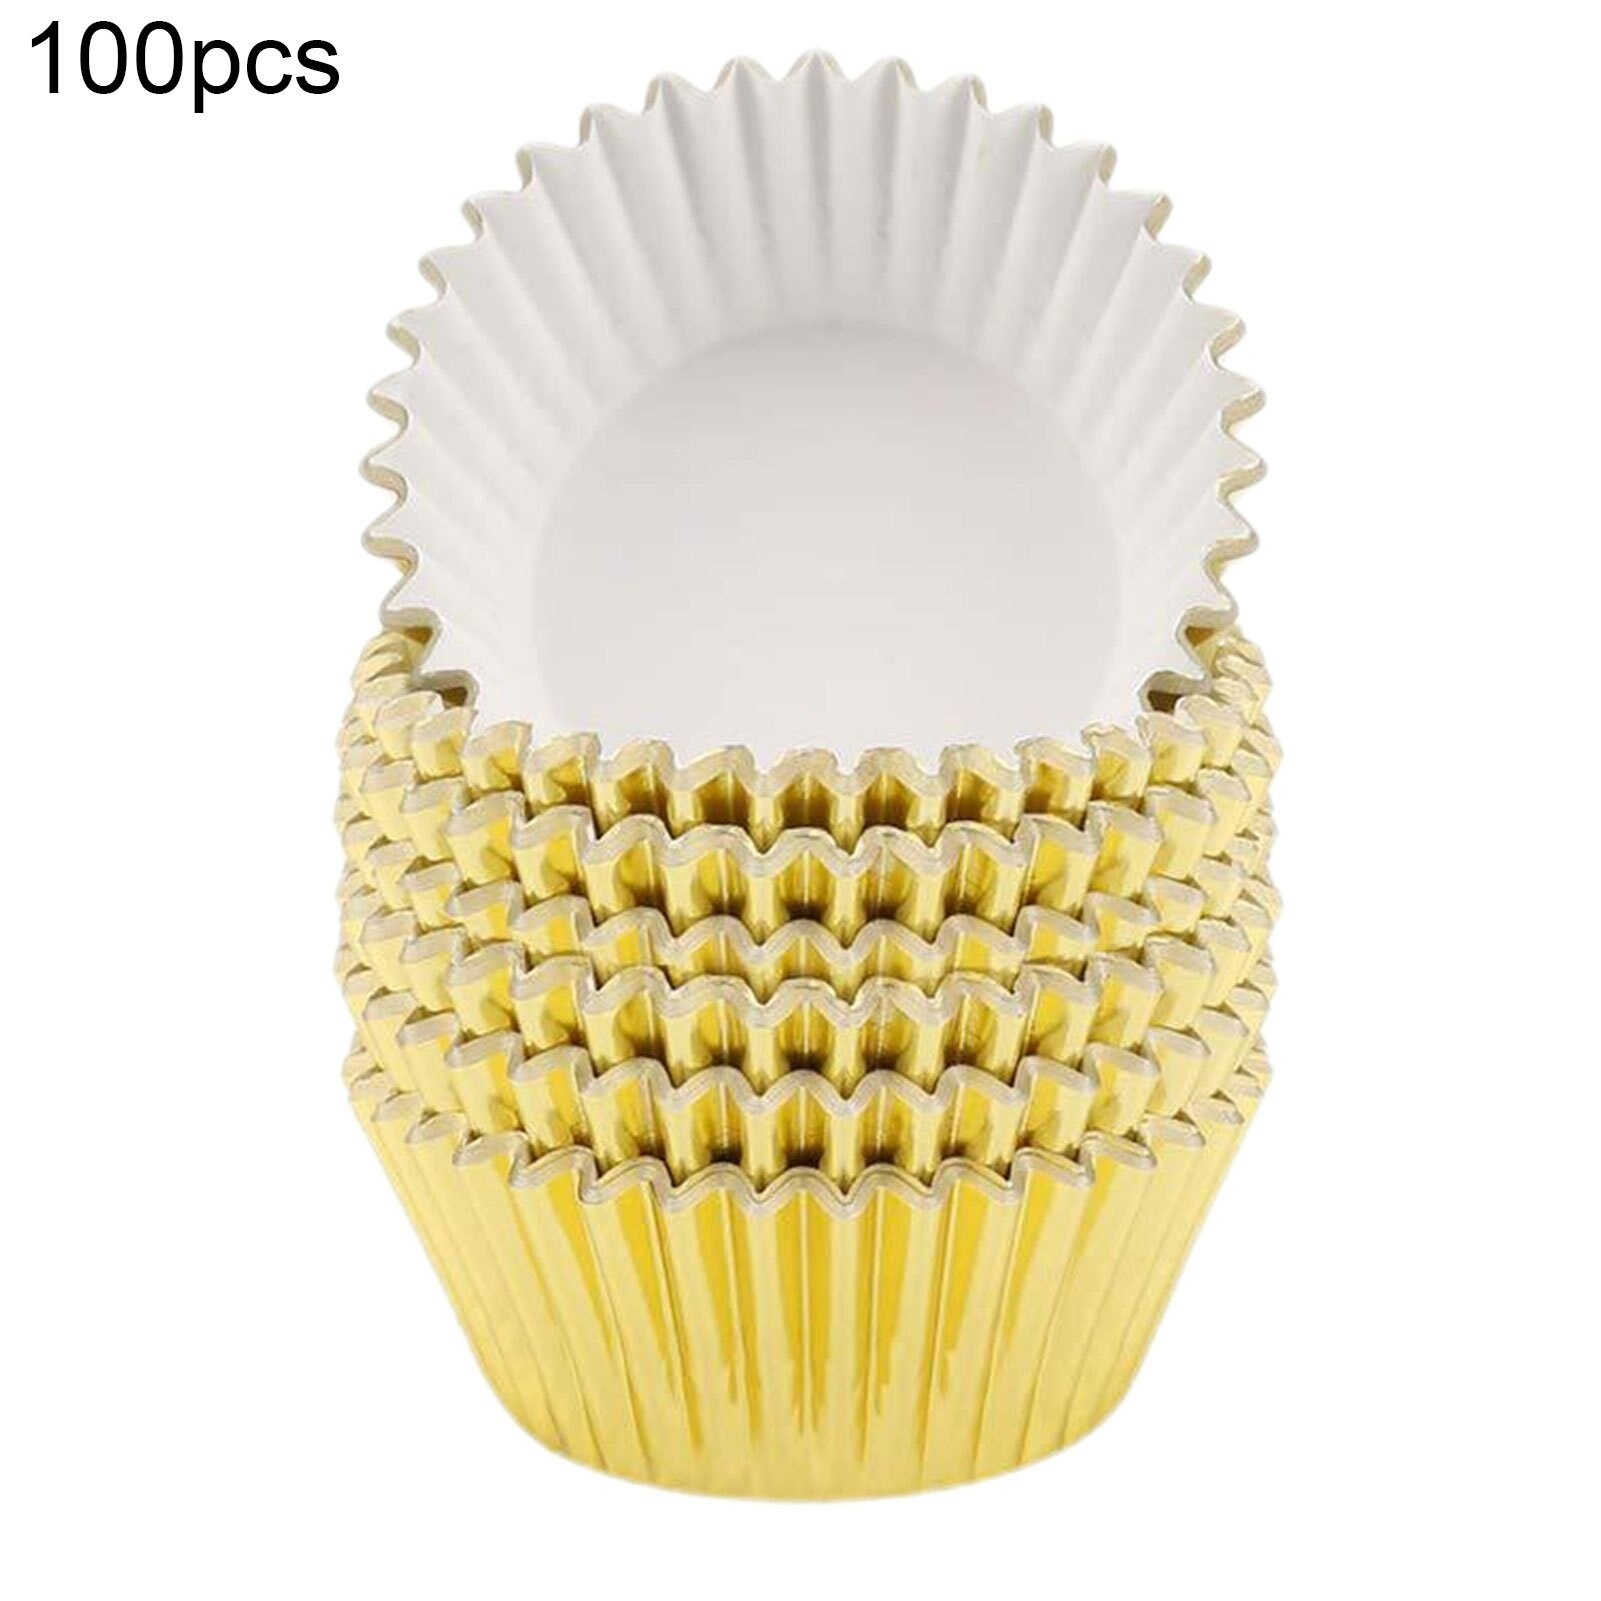 https://ak1.ostkcdn.com/images/products/is/images/direct/d876315ec9e82edef1f8be35183e93aa11b13481/100Pcs-Cake-Cups-Grease-Proof-Heat-Resistant-Aluminum-Foil-Cupcake-Liners-Wrappers-Baking-Supplies.jpg